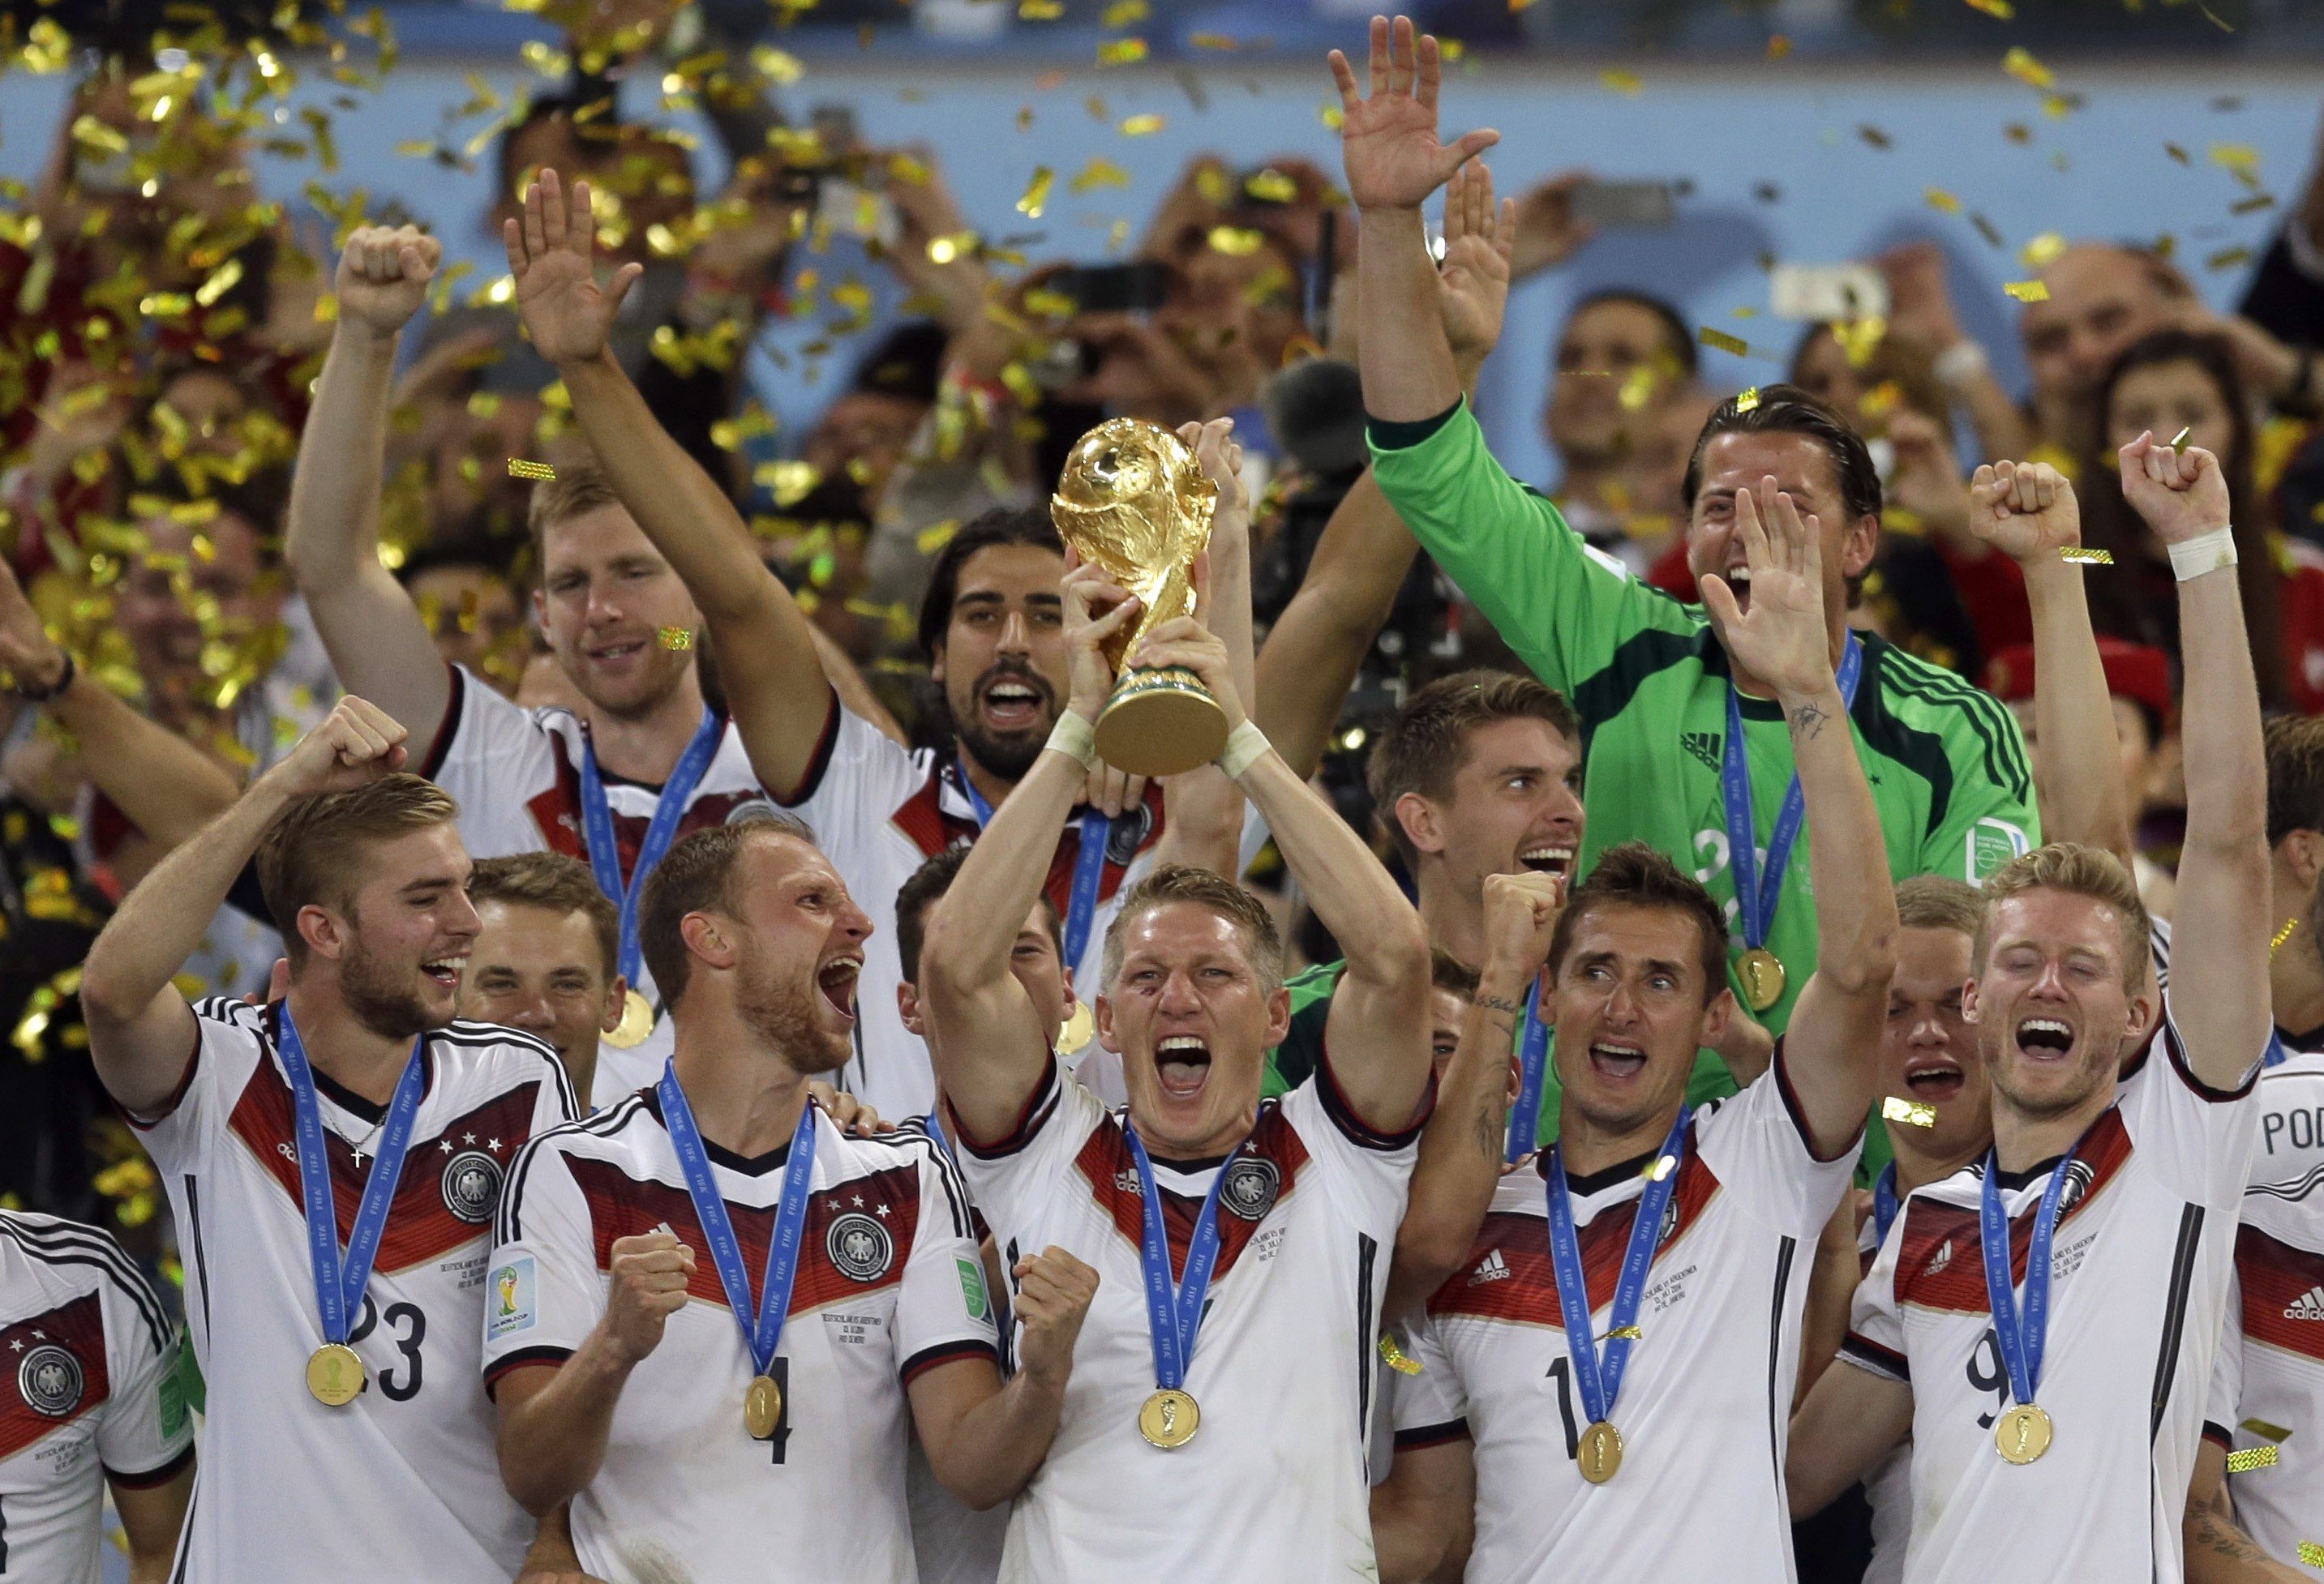 World champions Germany are expected to be popular with Chinese fans watching the 2018 World Cup. Photo: AP